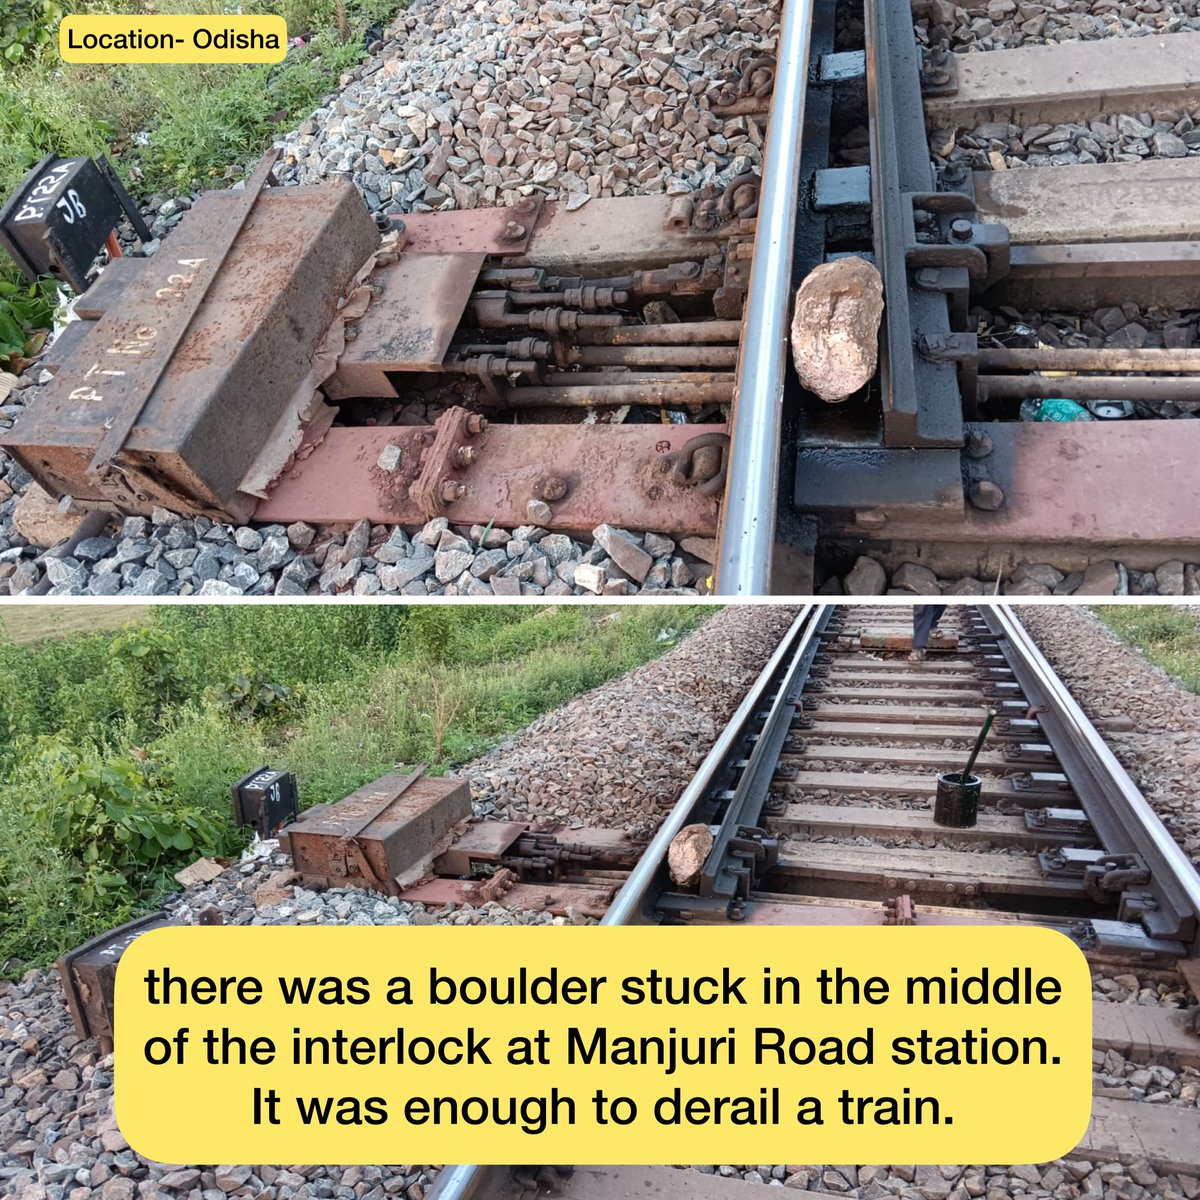 A potential catastrophe was prevented as a large rock was strategically positioned within the intersection at Manjuri Road station in Bhadrak, Odisha. Its presence had the potential to cause a train derailment, resulting in drastically altered visuals if such an event had…